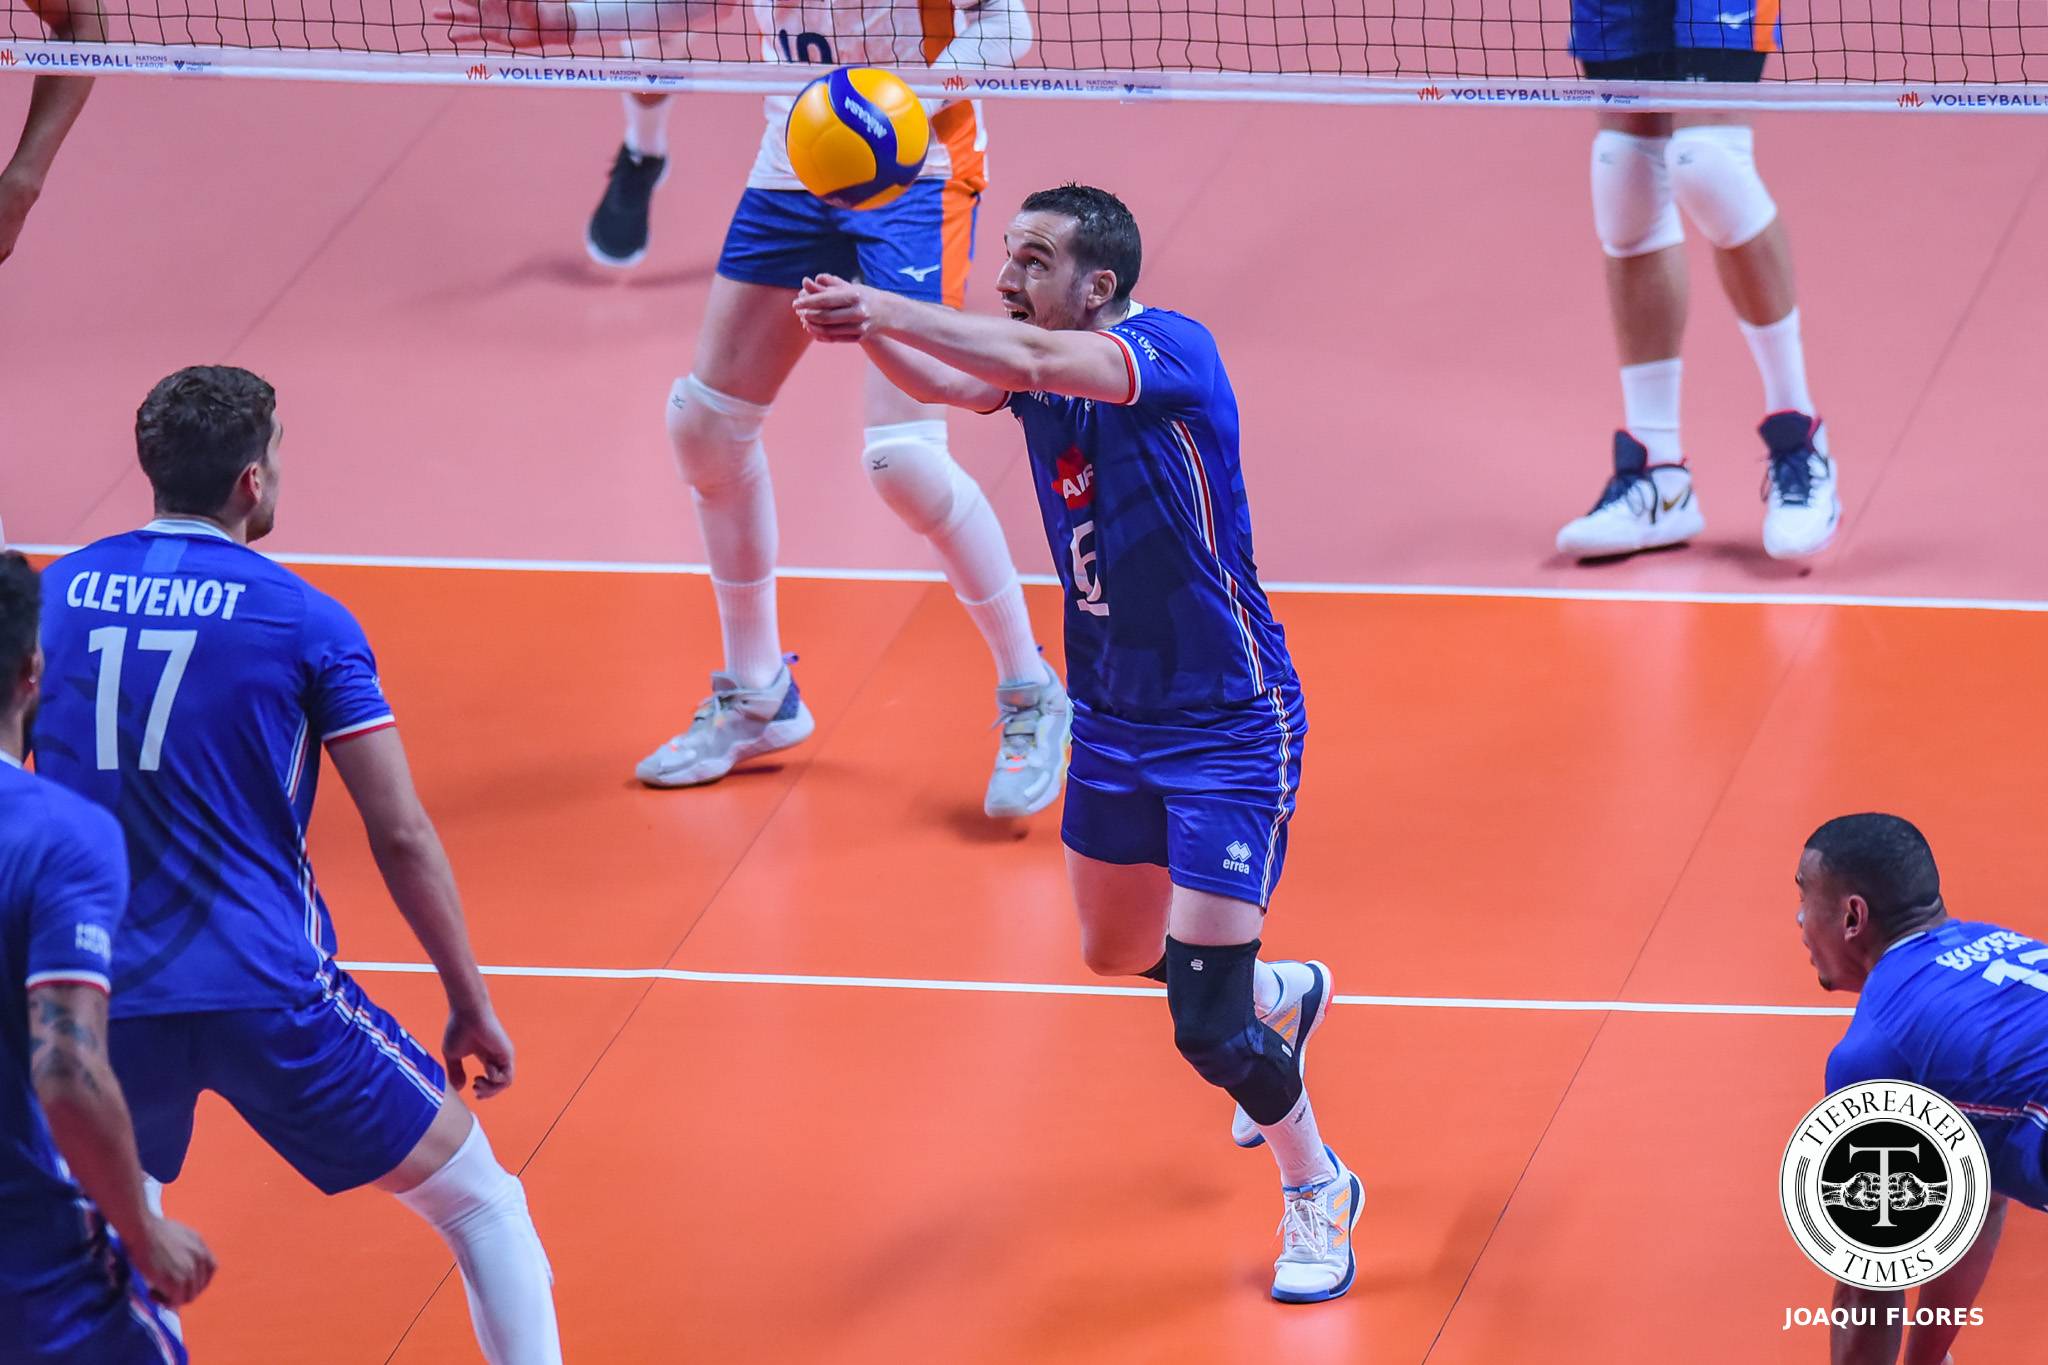 VNL Toniutti, France make quick work of Netherlands to go 5-1